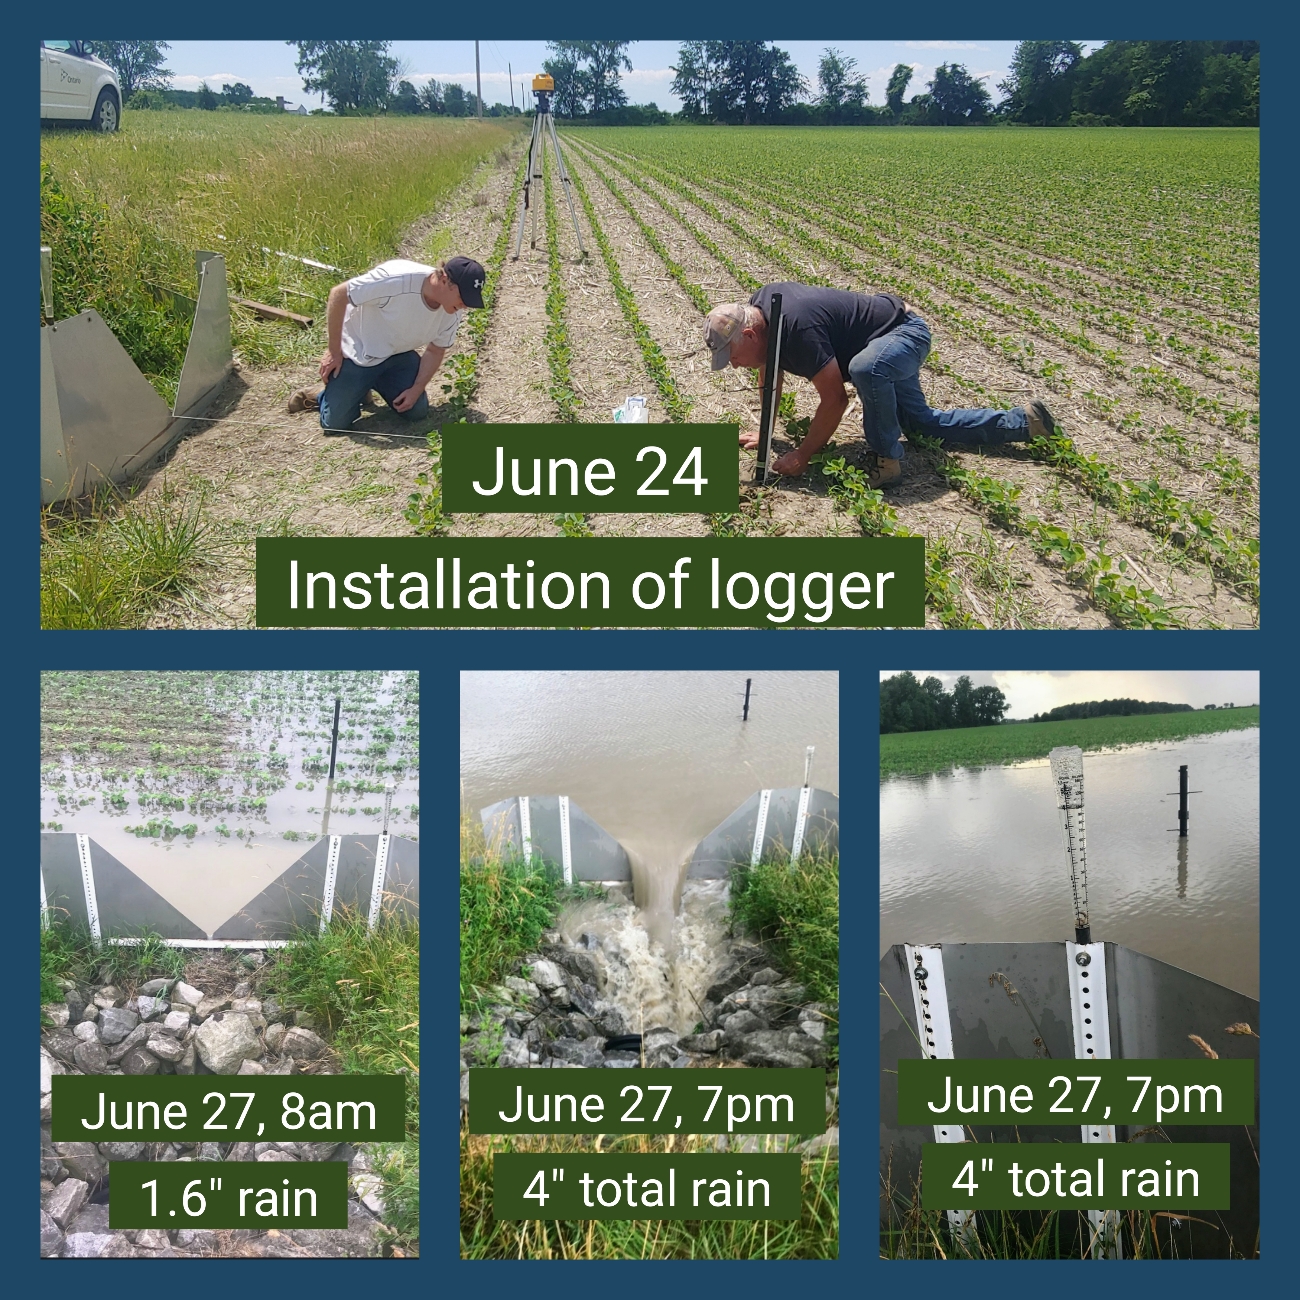 In June 2020, Henry Denotter and Kevin McKague (OMAFRA) worked together with ERCA to install v-notch weirs and water level loggers at the end of three separate swales in the field.  These edge of field sites are monitored through the ONFARM progran to determine nutrient loss during rain events and will be in place for several years as we test different BMPs for continuous cover.  *The weirs do not create extended periods of ponding and are designed to keep the water moving.